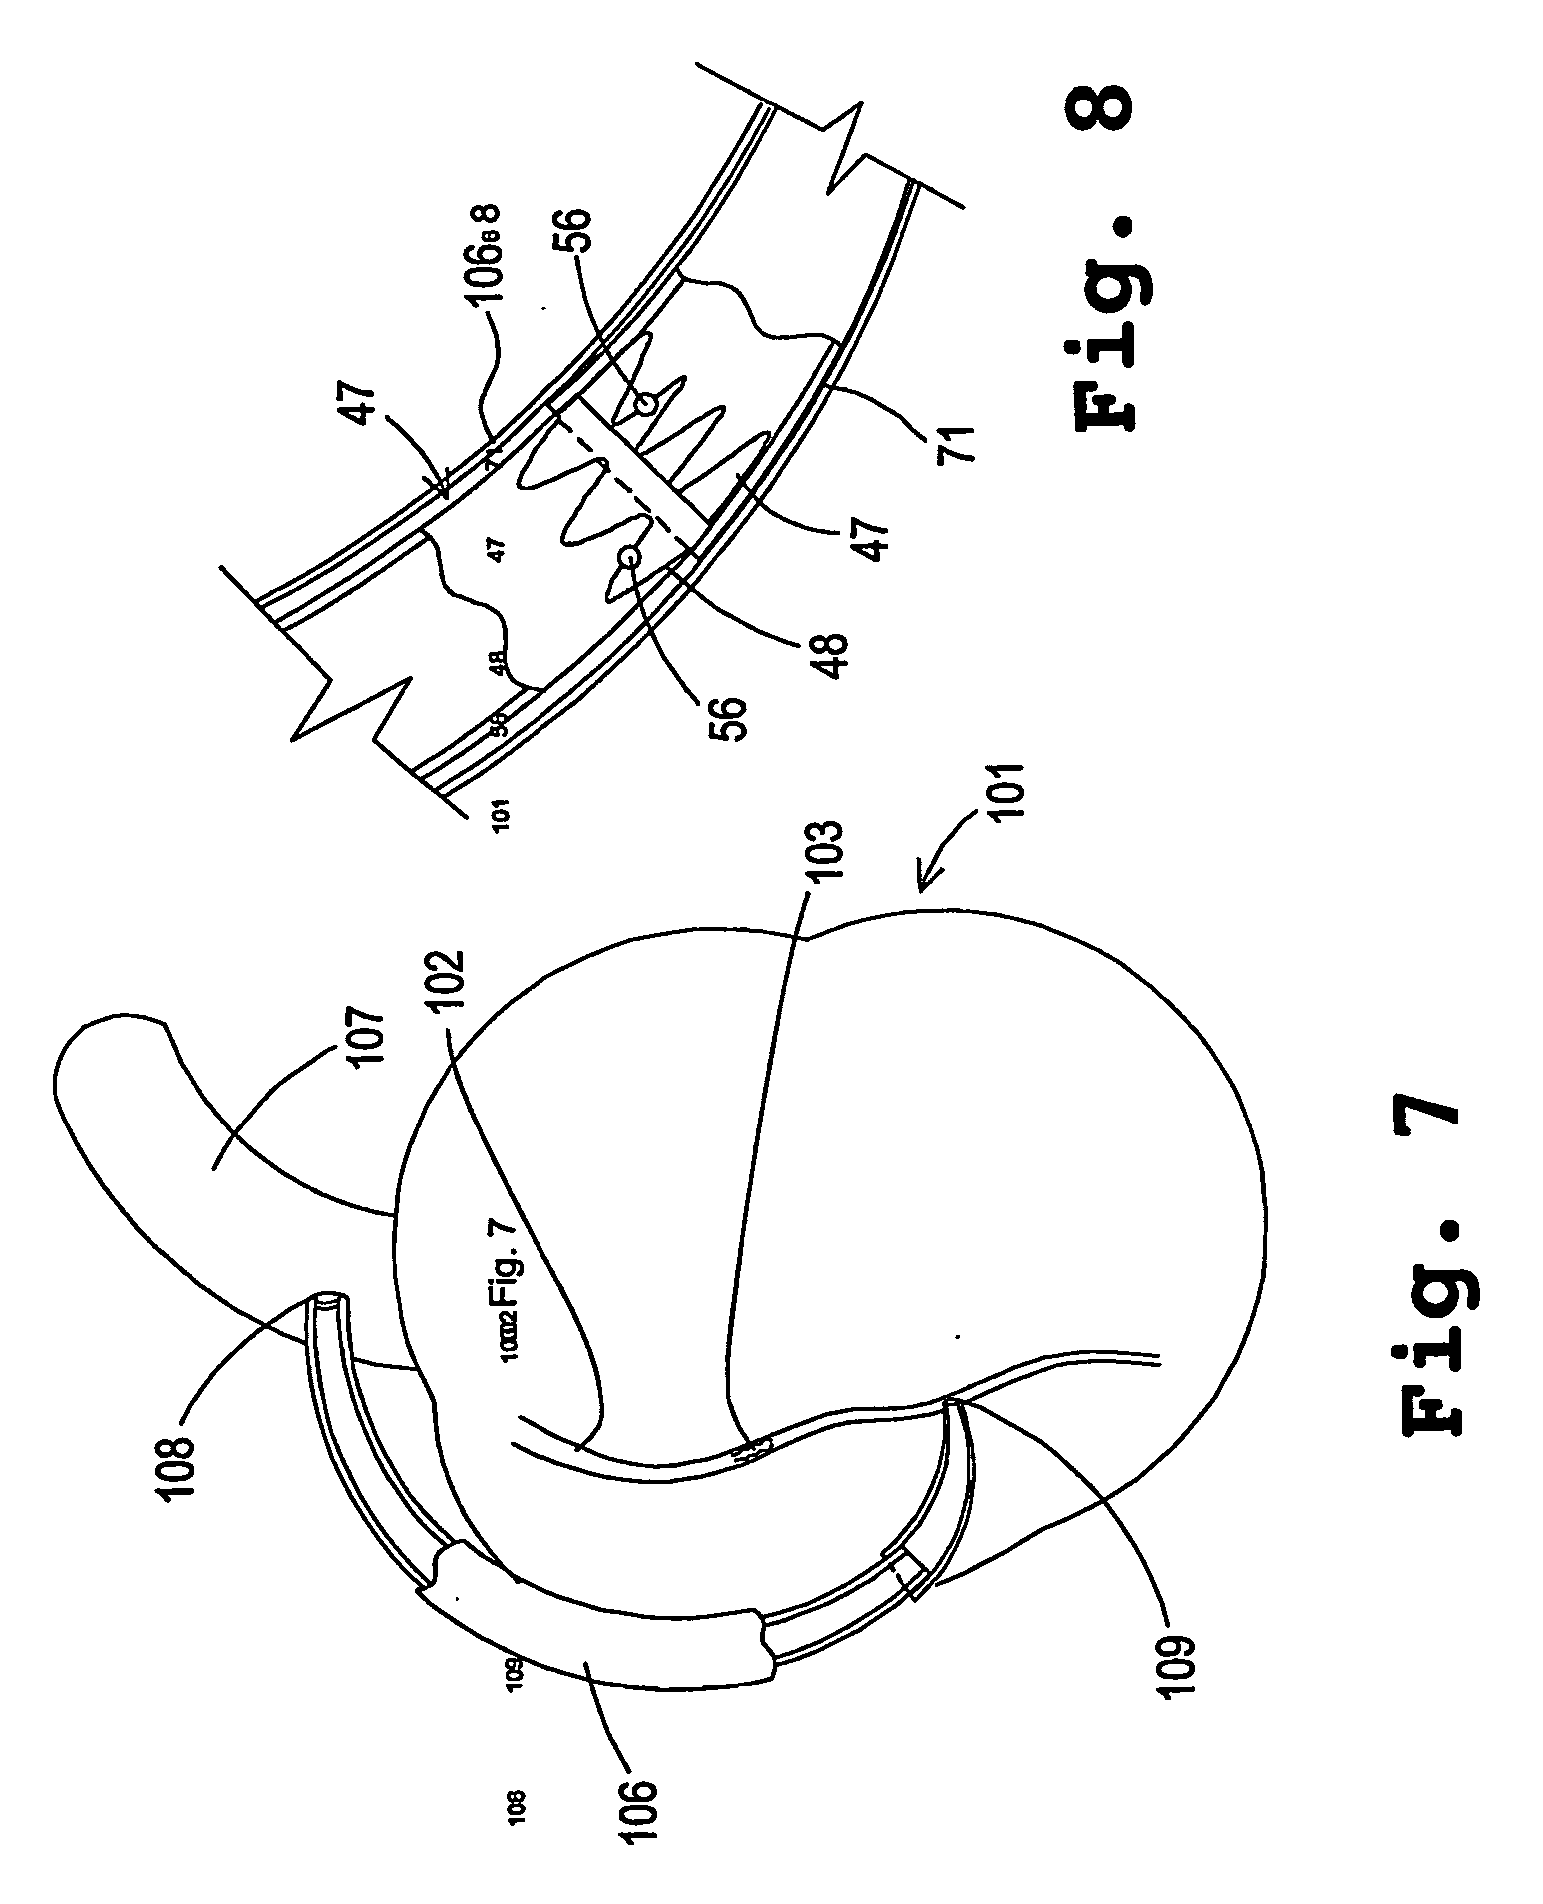 Composite stent with polymeric covering and bioactive coating